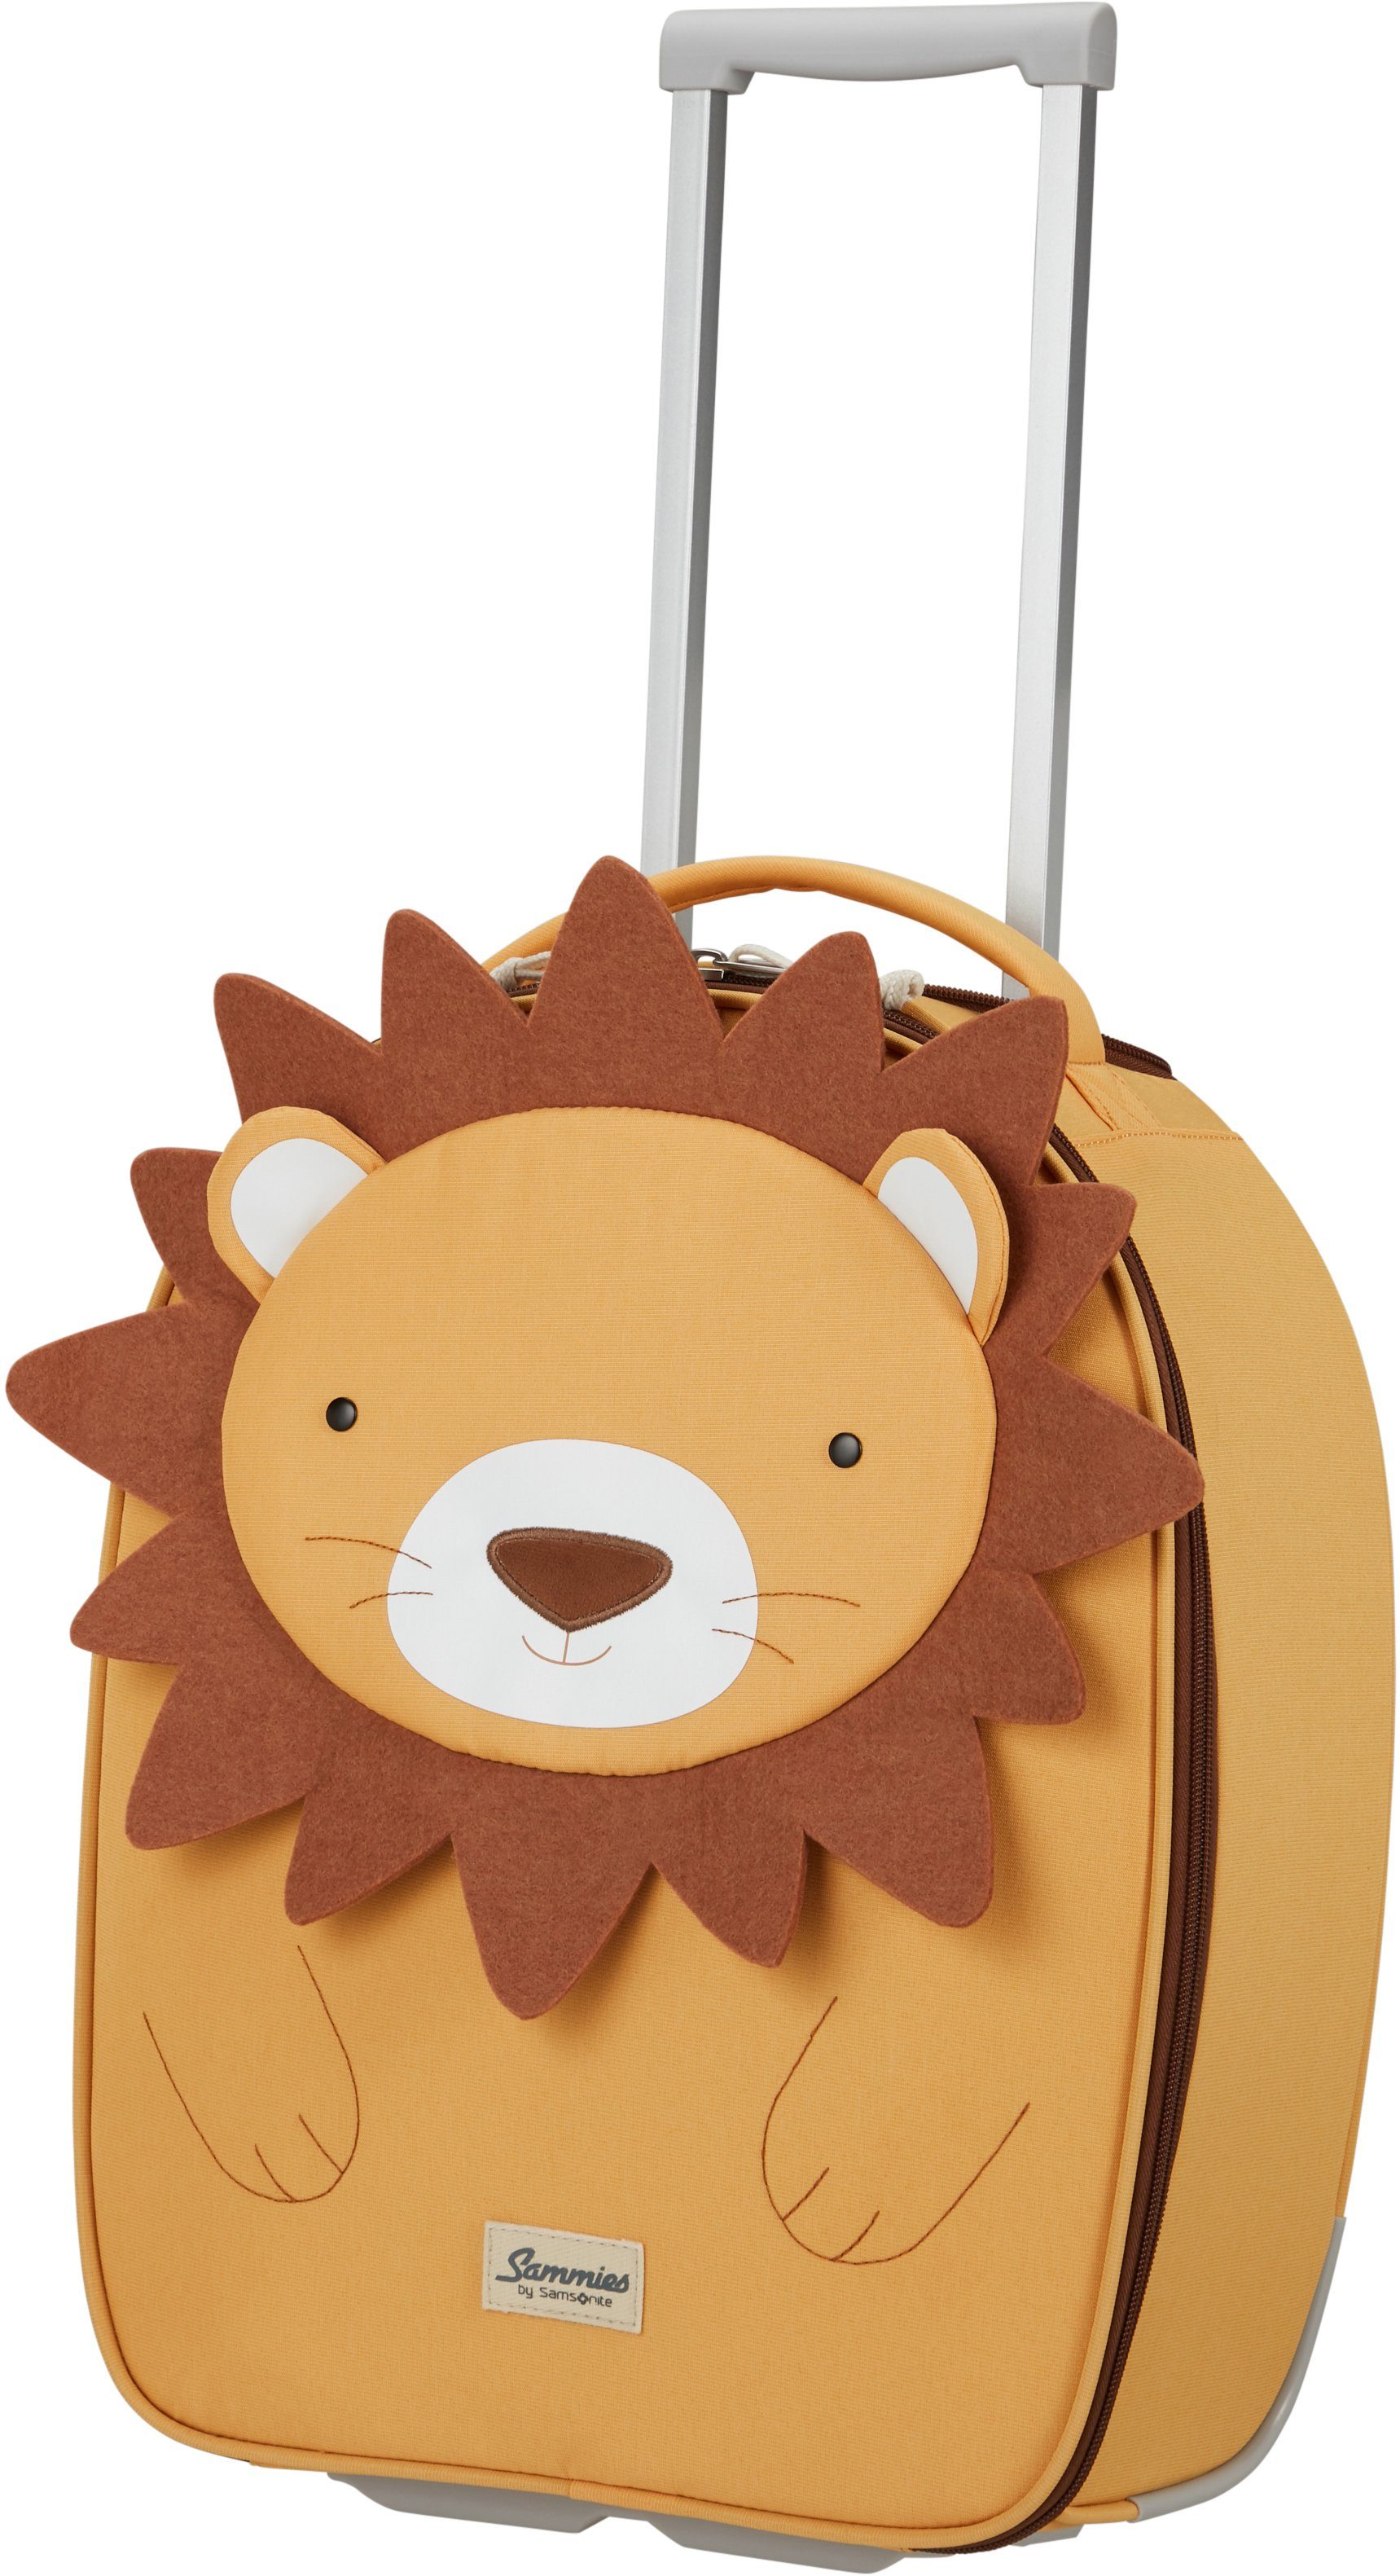 Samsonite Kinderkoffer Happy Rollen, 2 recyceltem aus Lester, Material ECO, Sammies Lion